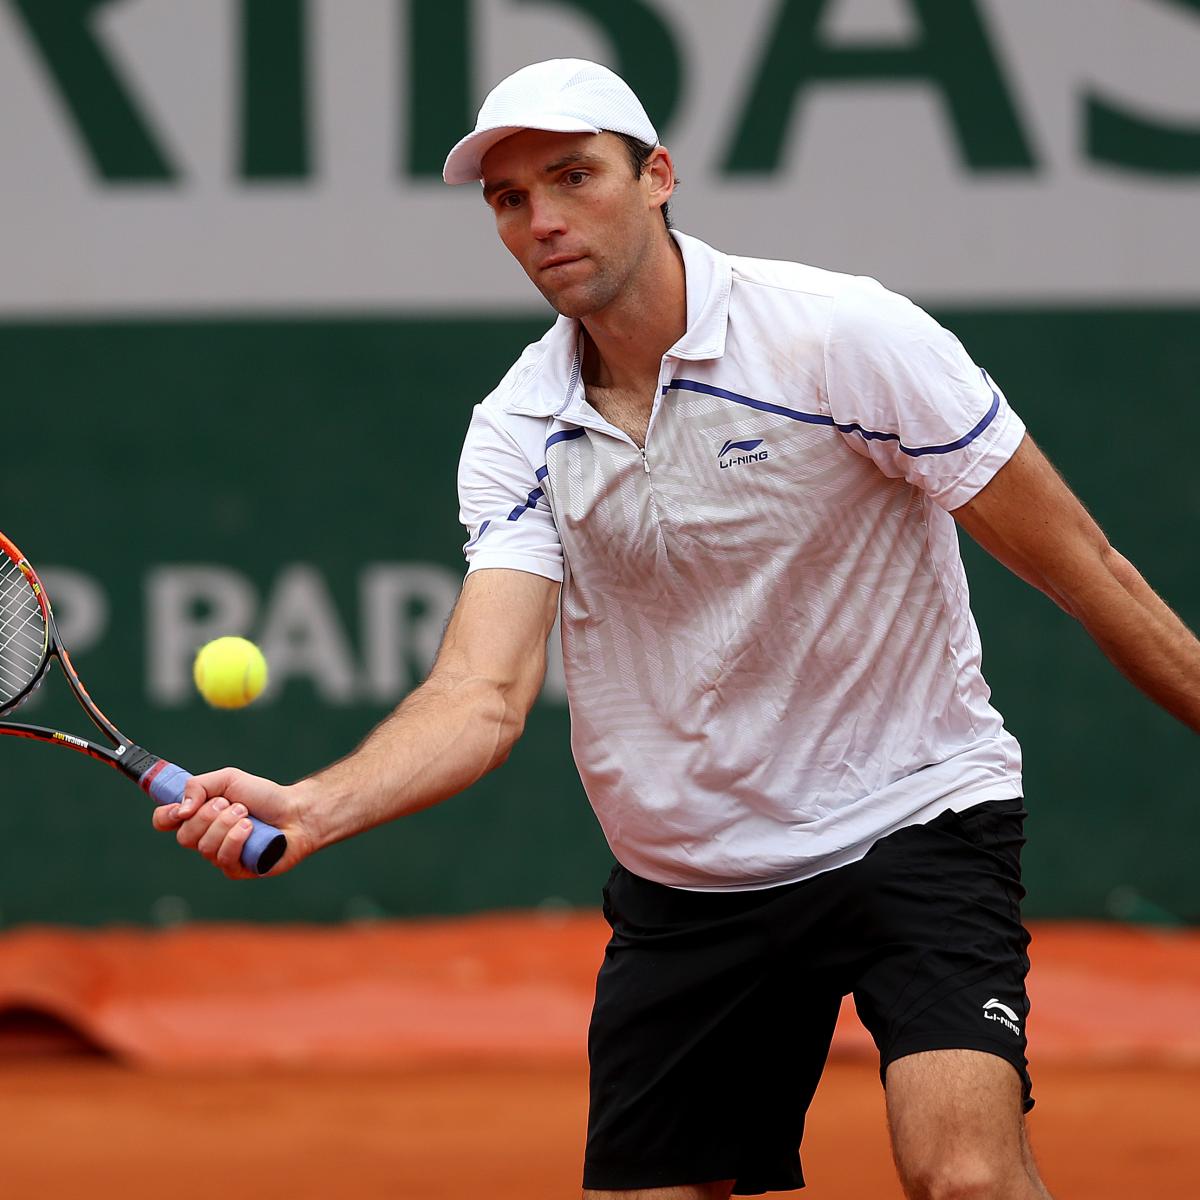 French Open 2014 Results: Most Surprising Scores from Day 3 at Roland